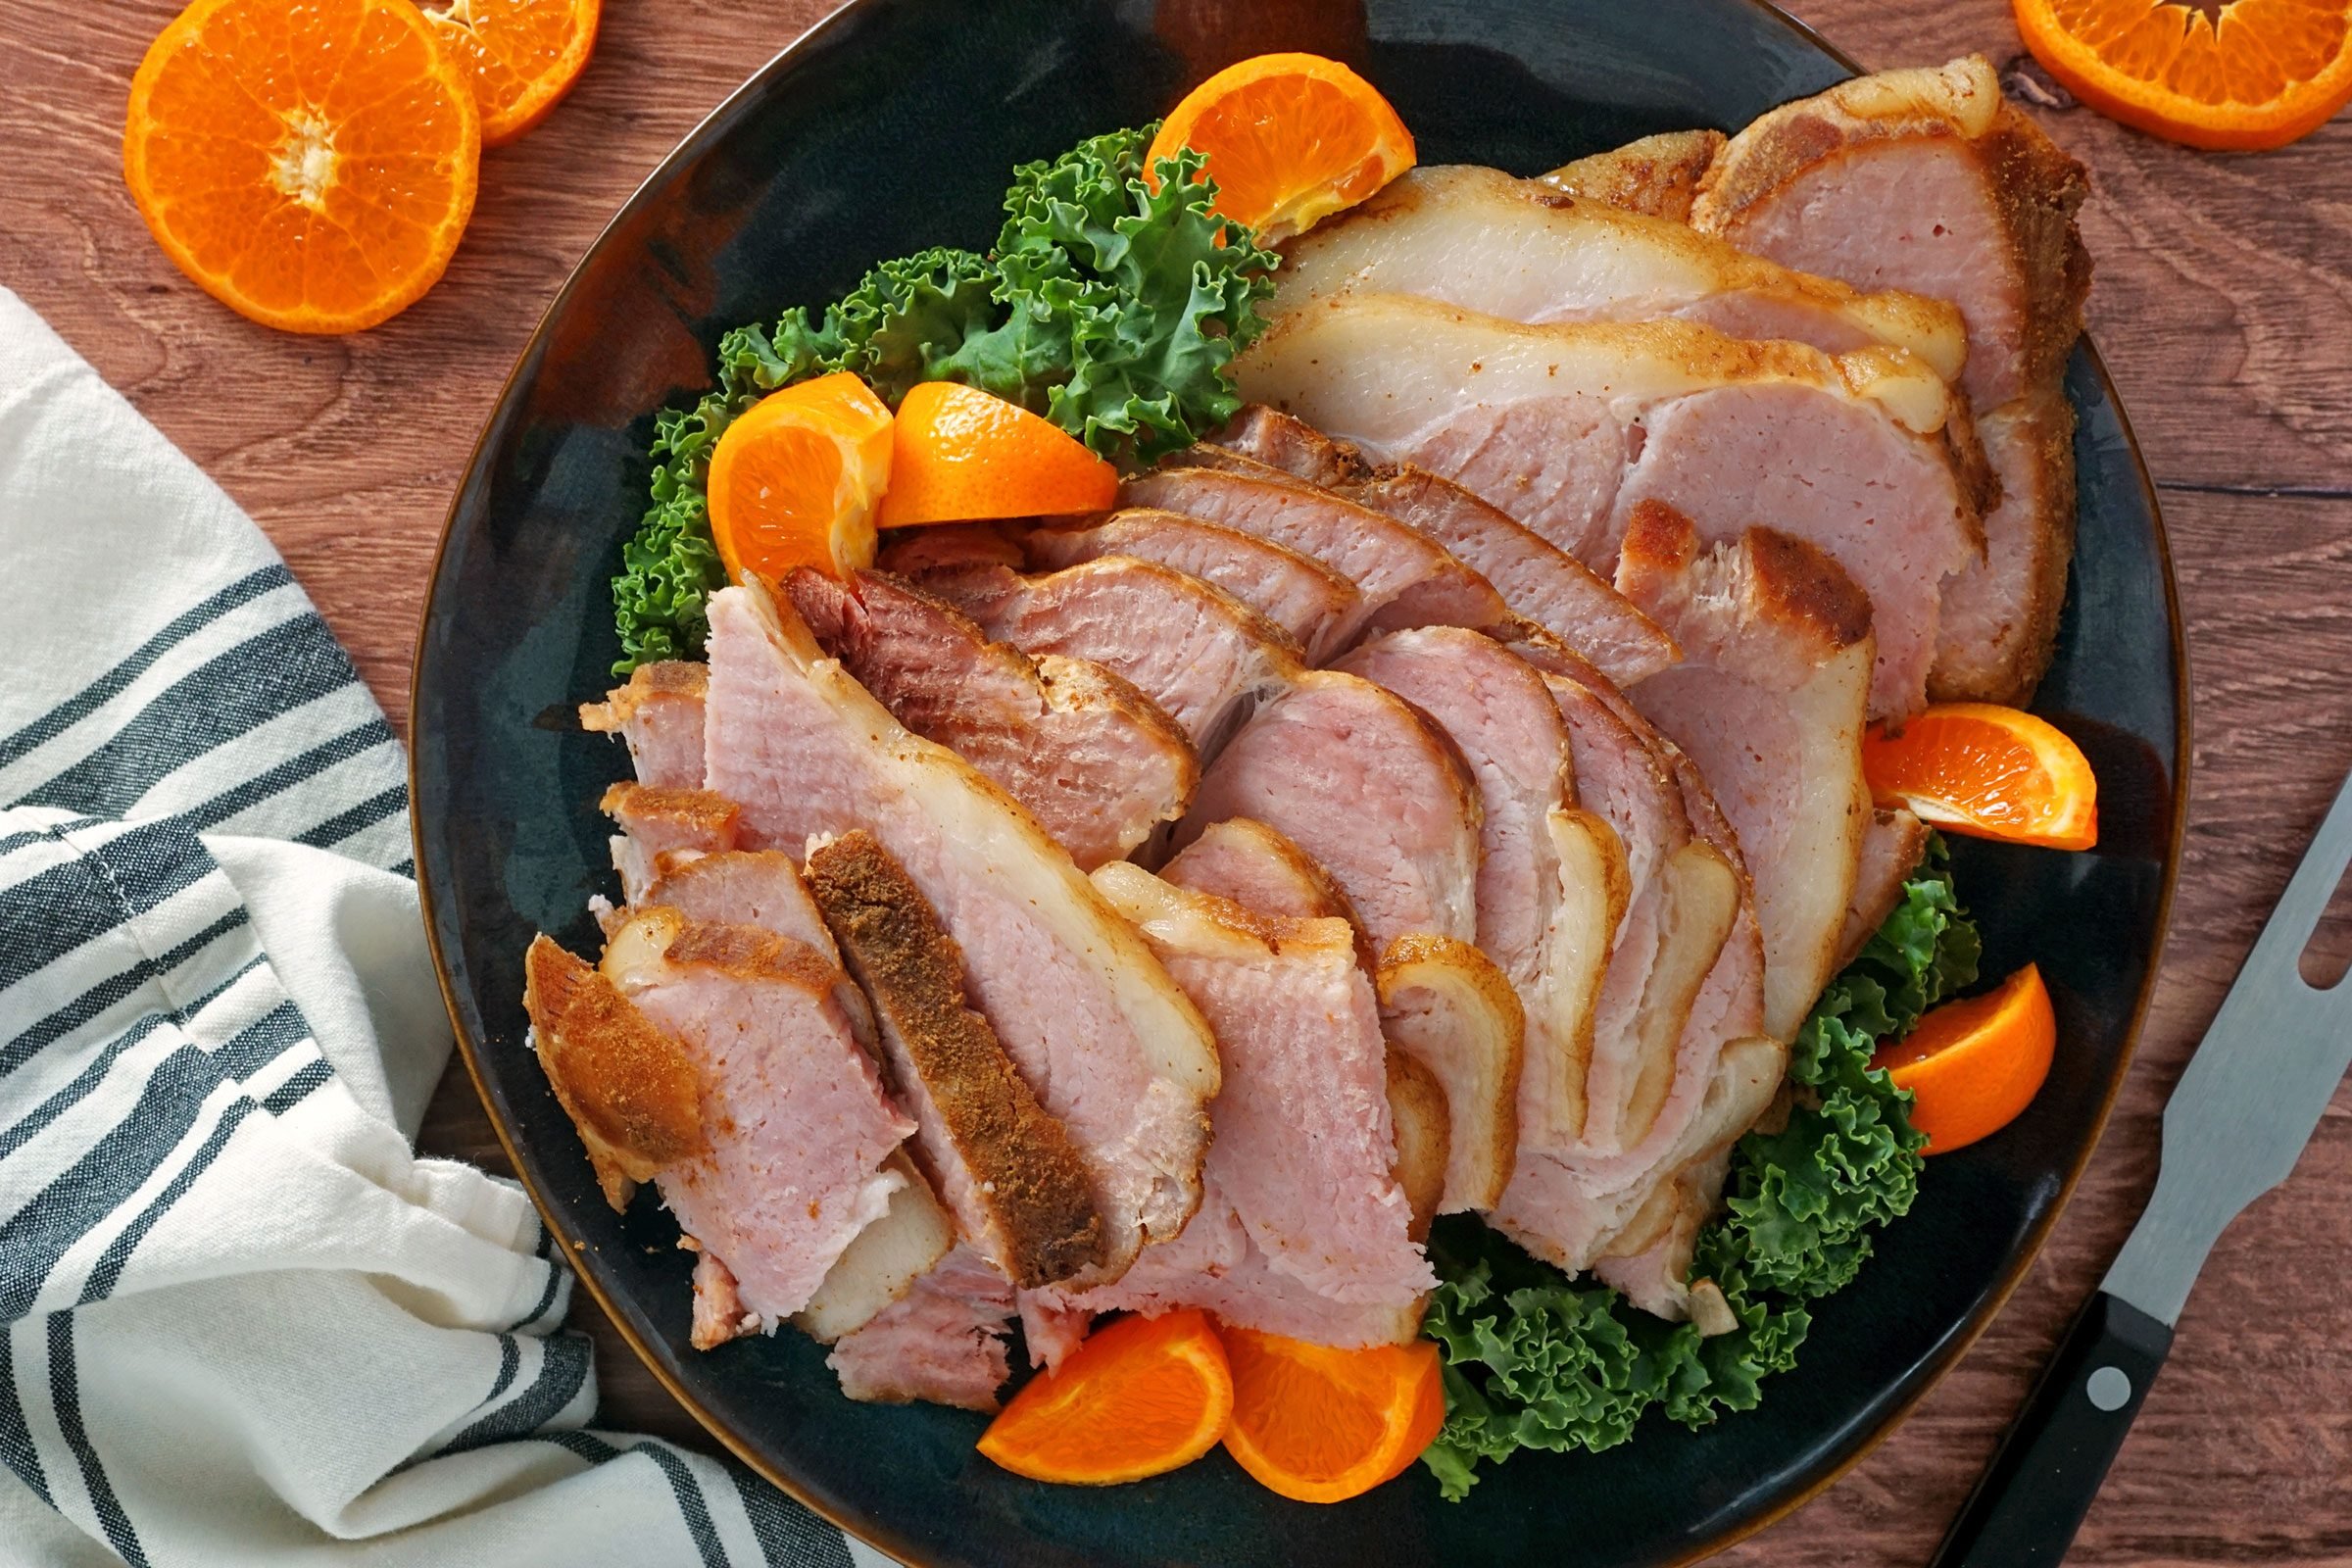  How to Cook a Ham in Your Slow Cooker